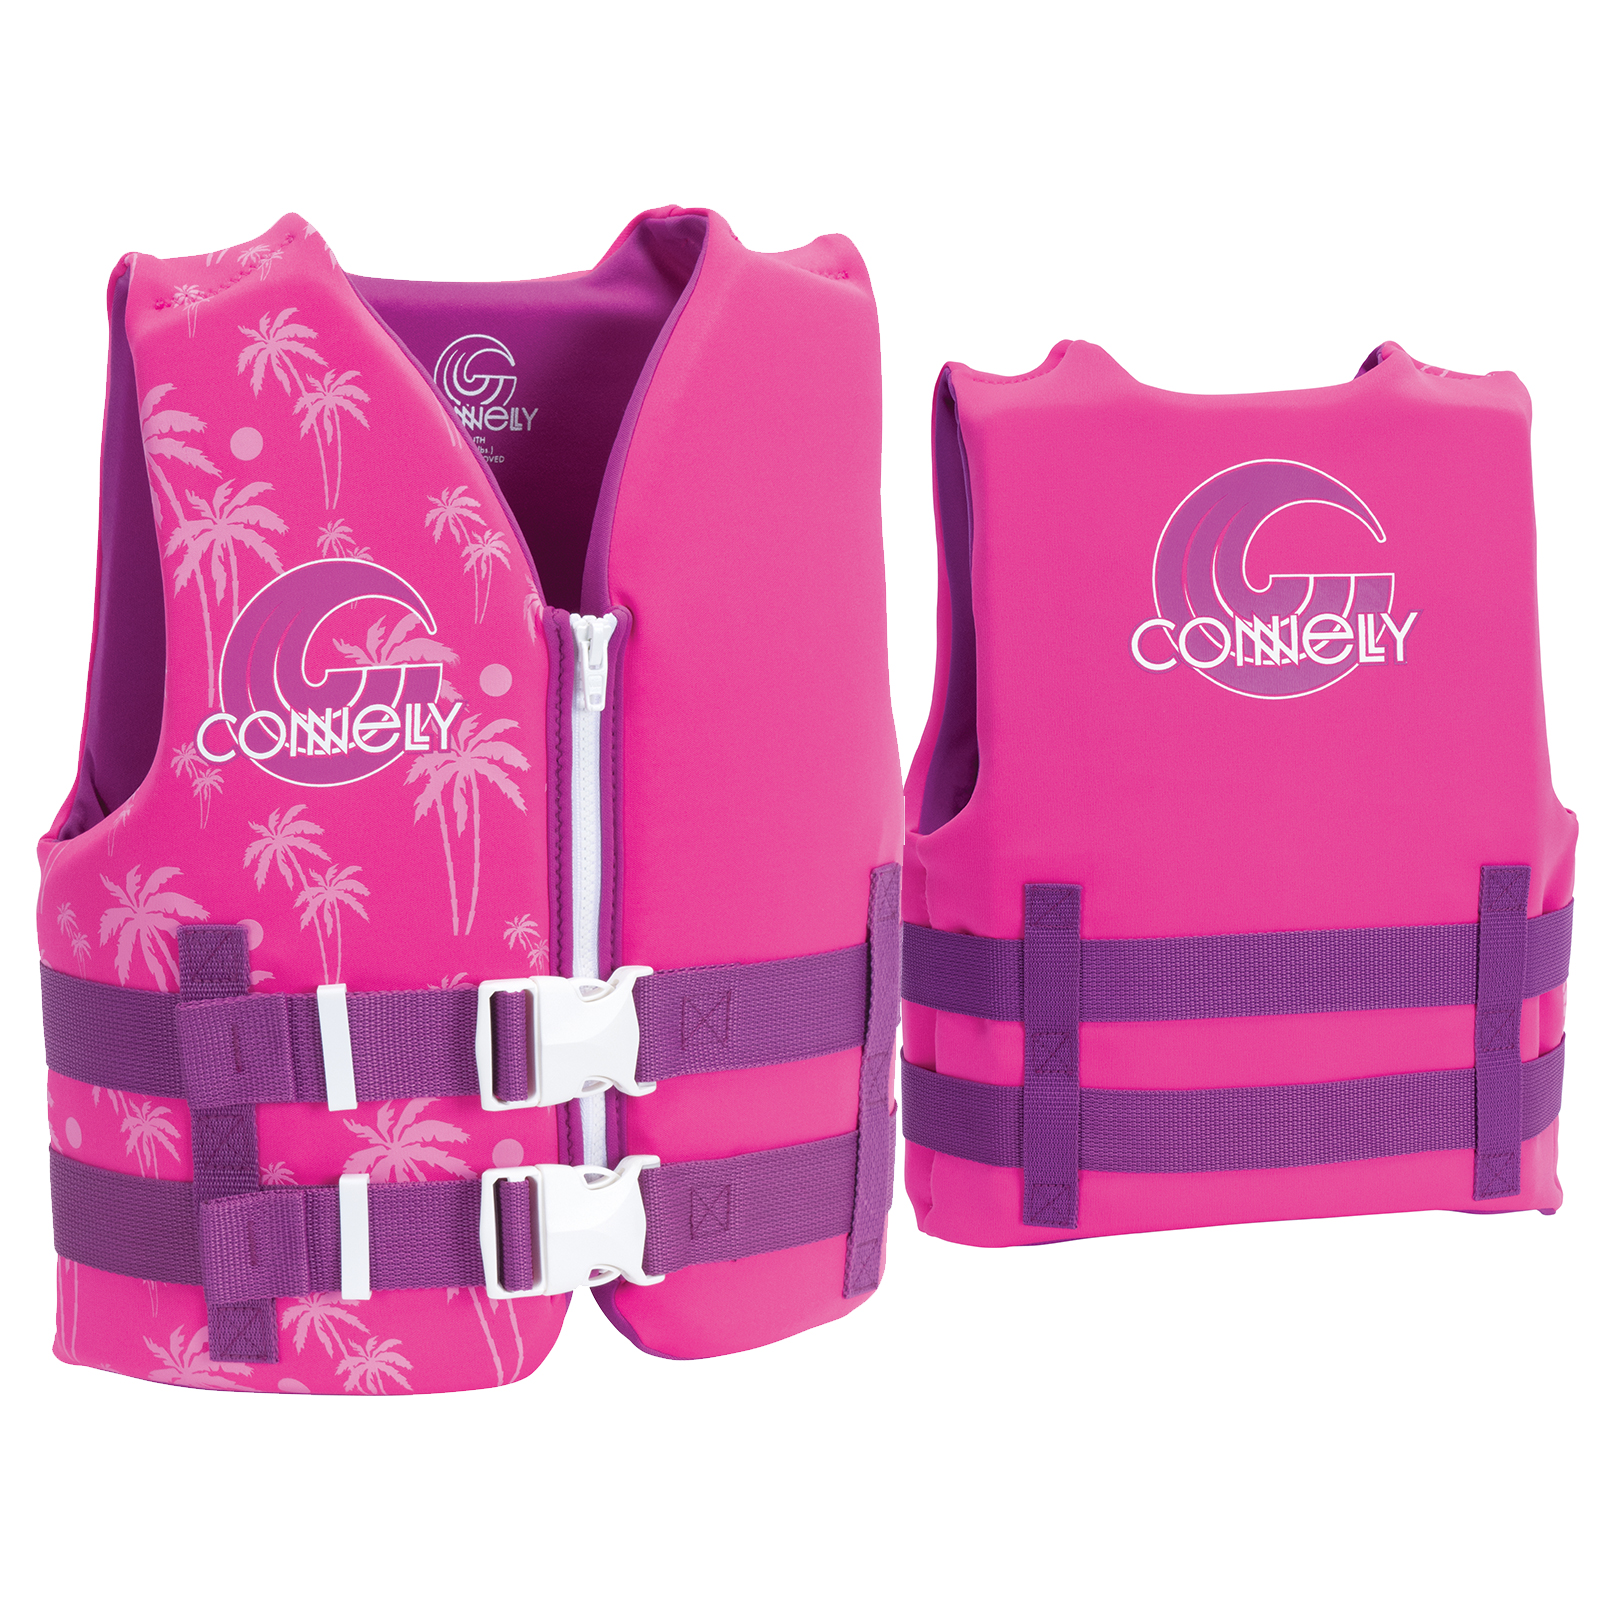   GIRL'S PROMO NEO LIFE VEST - YOUTH 22-40KG CONNELLY 2019